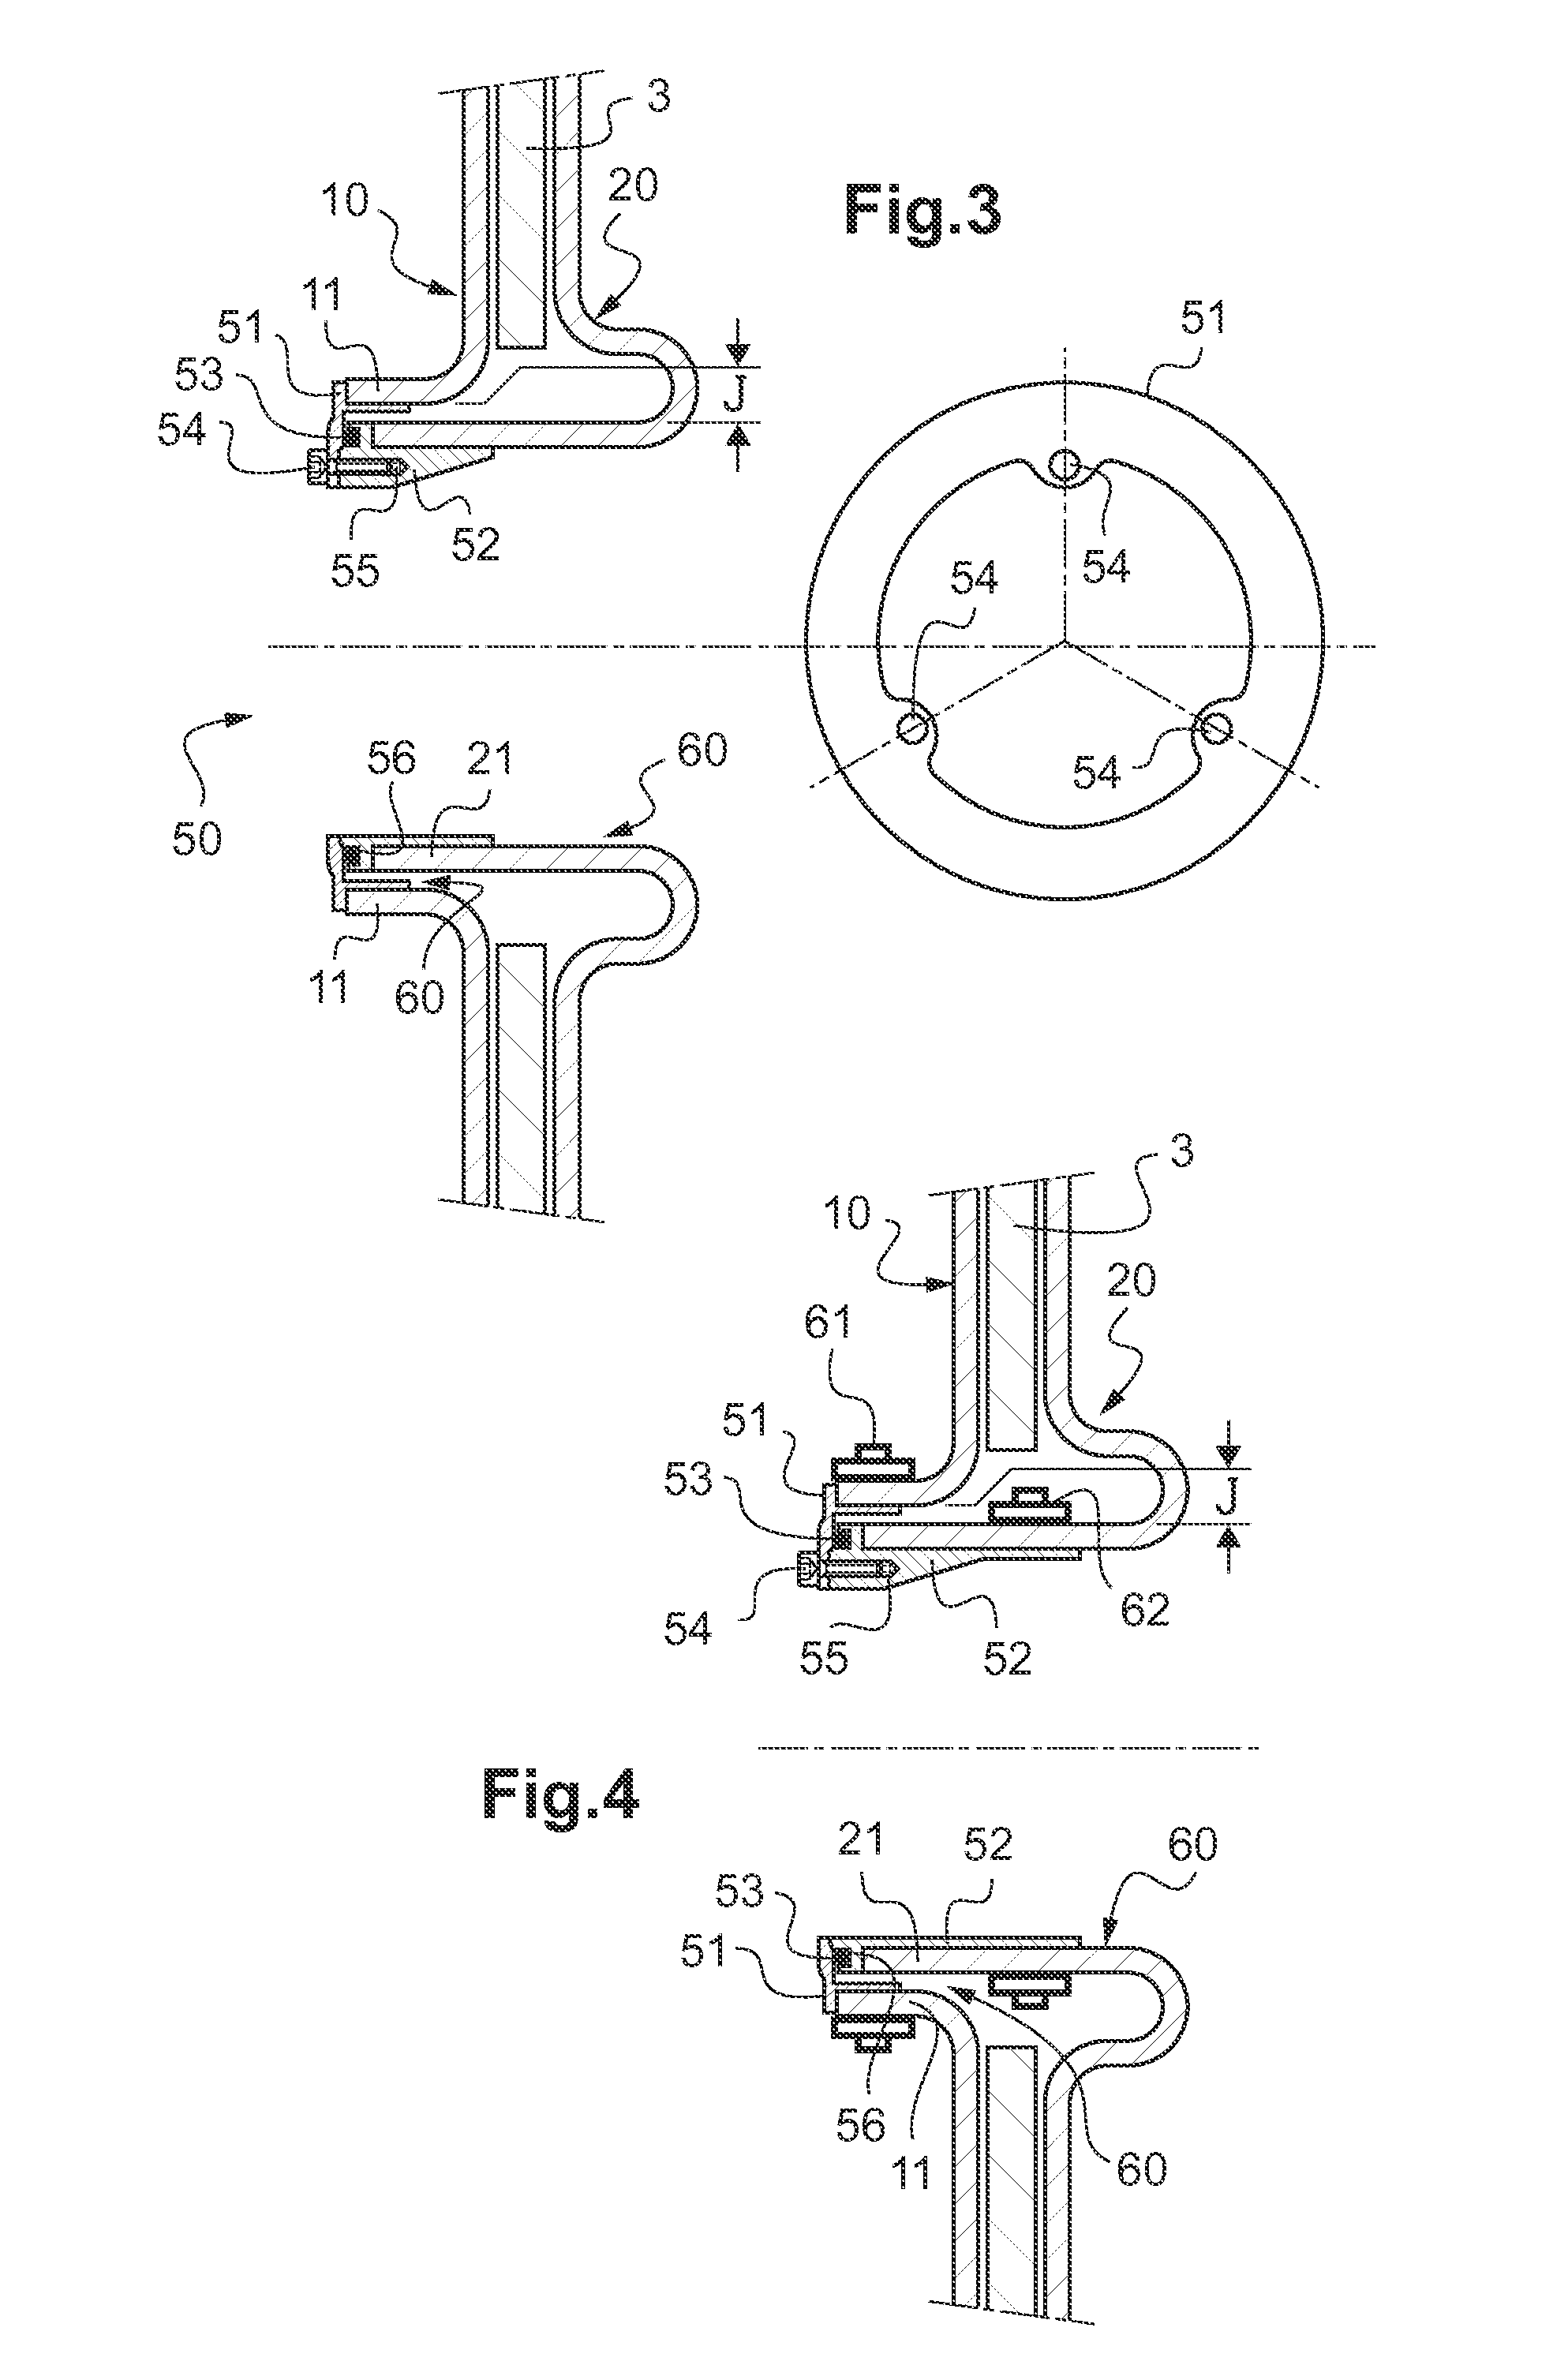 Removable coupling device for coupling together two flexible pipes